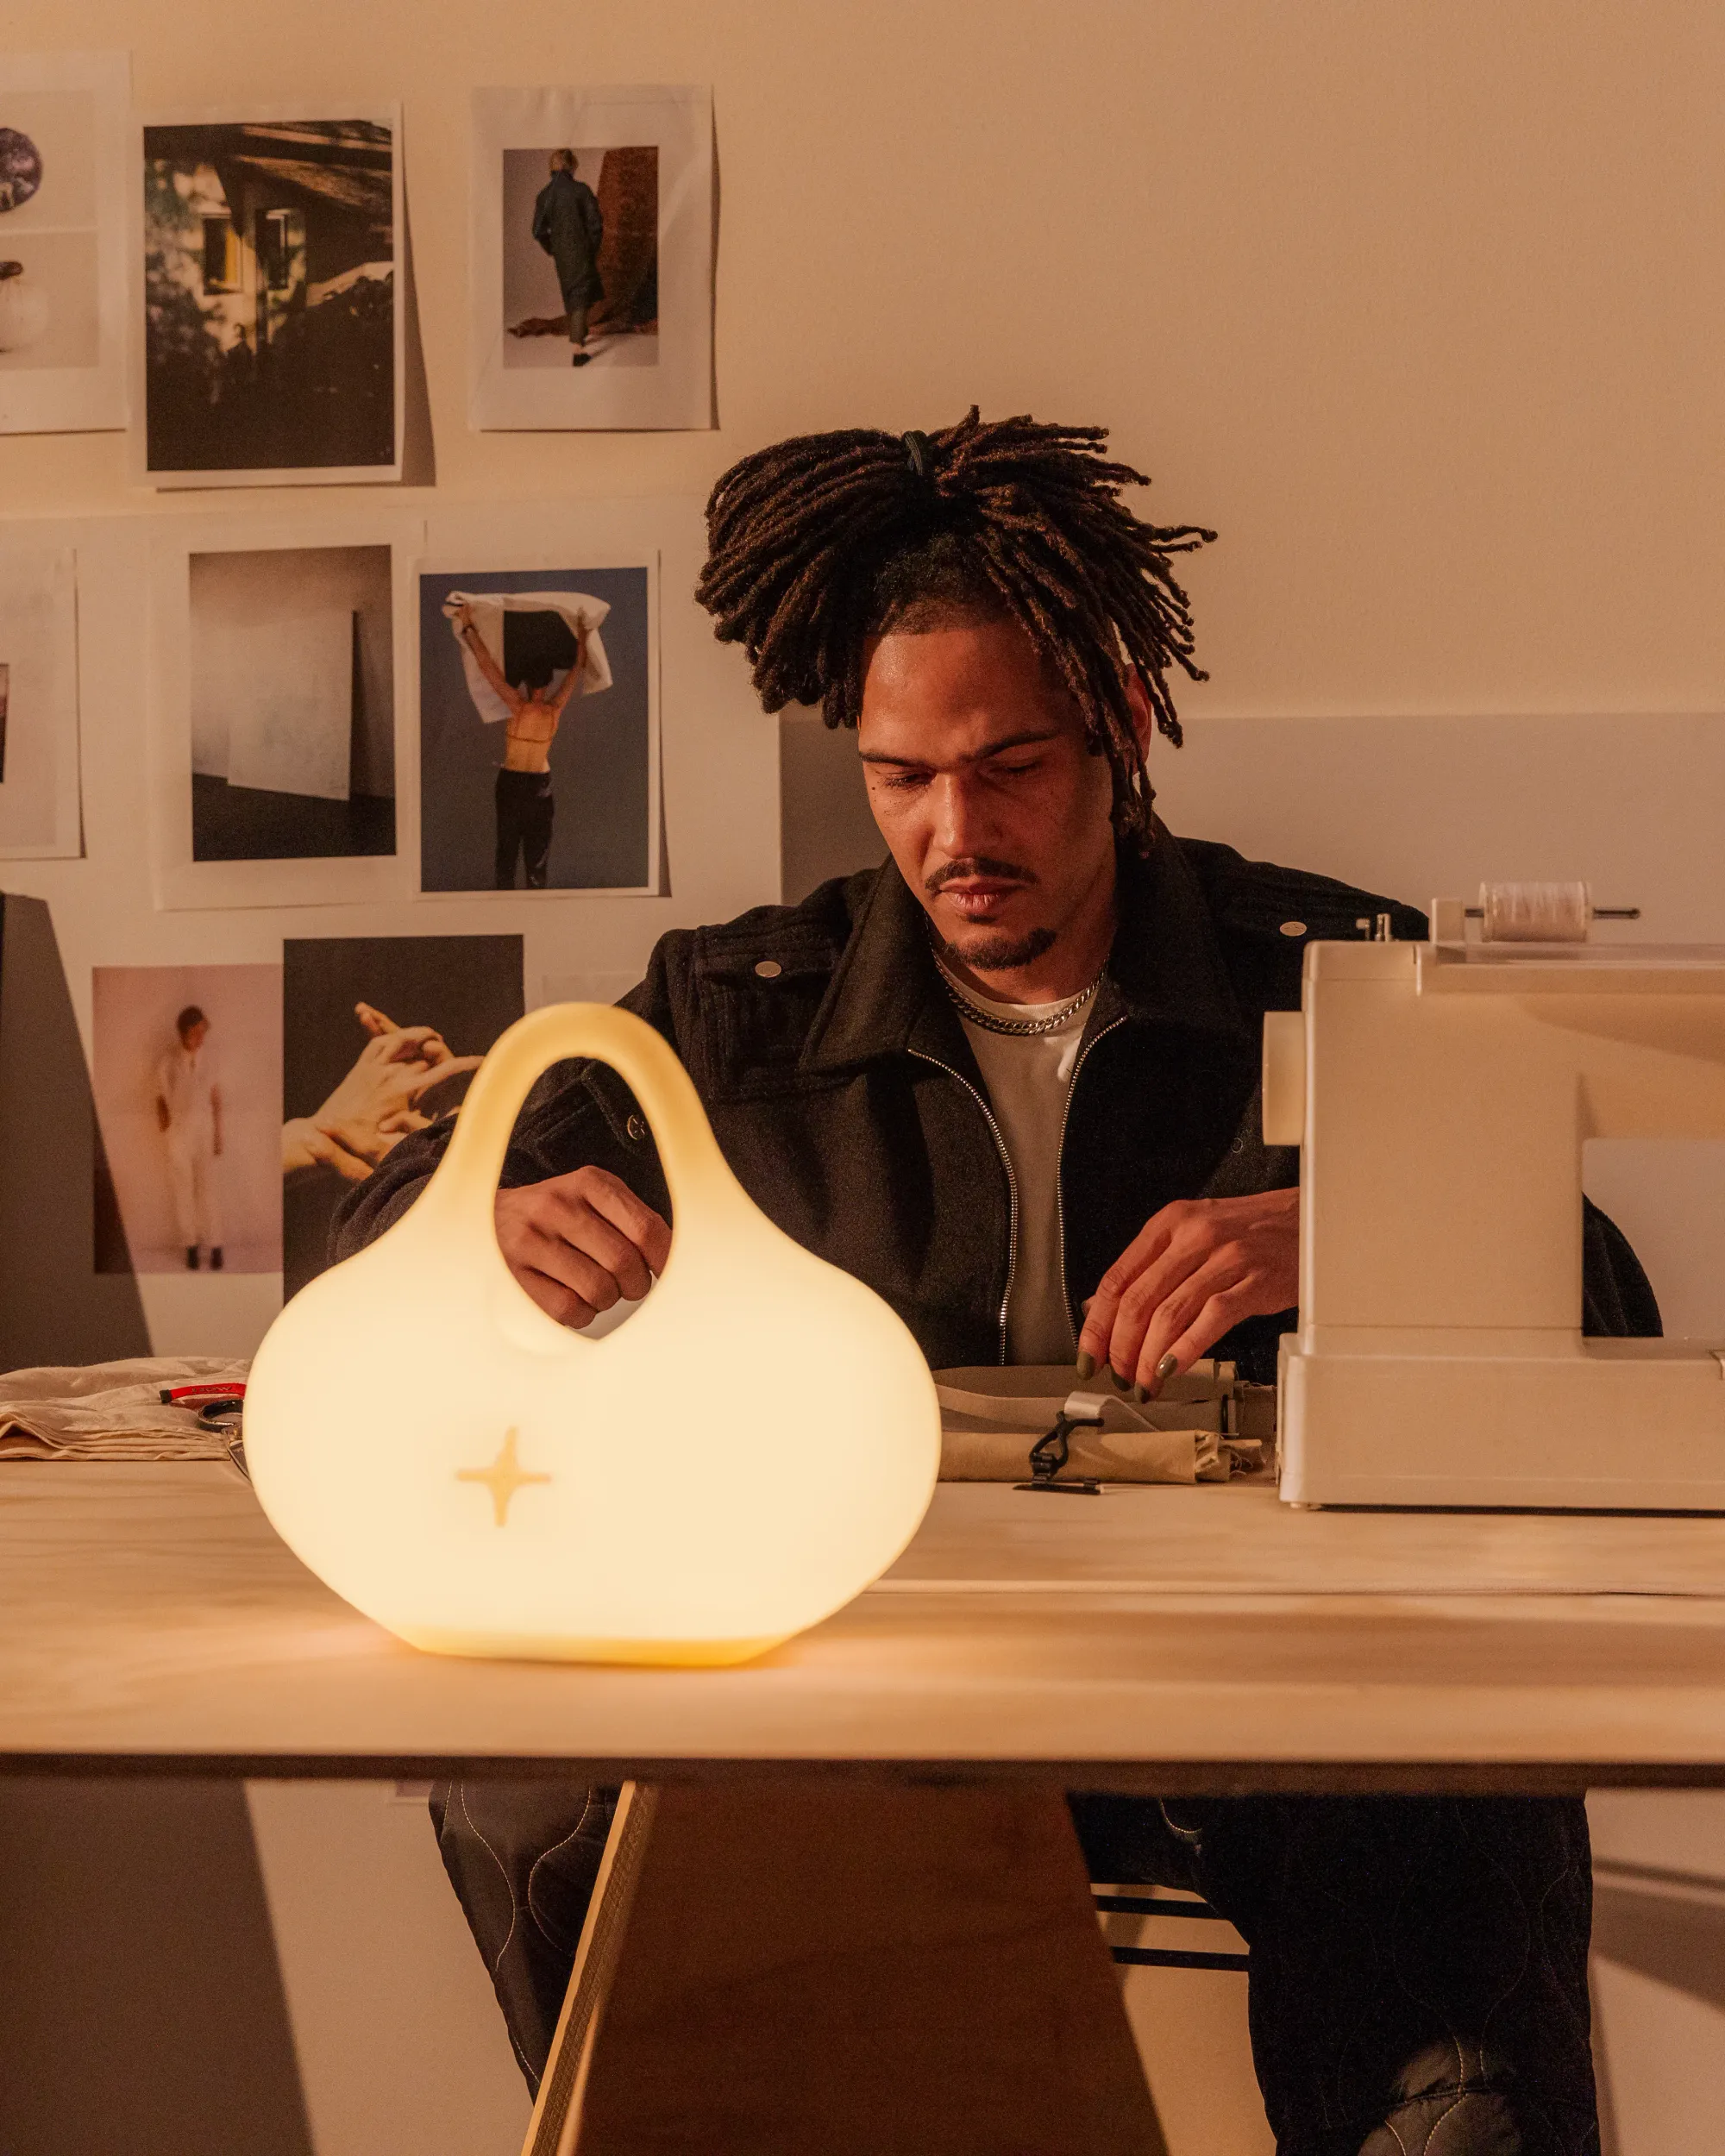 A man is hard at work sewing in their home office table illuminated by Gantri’s Bag Table Light